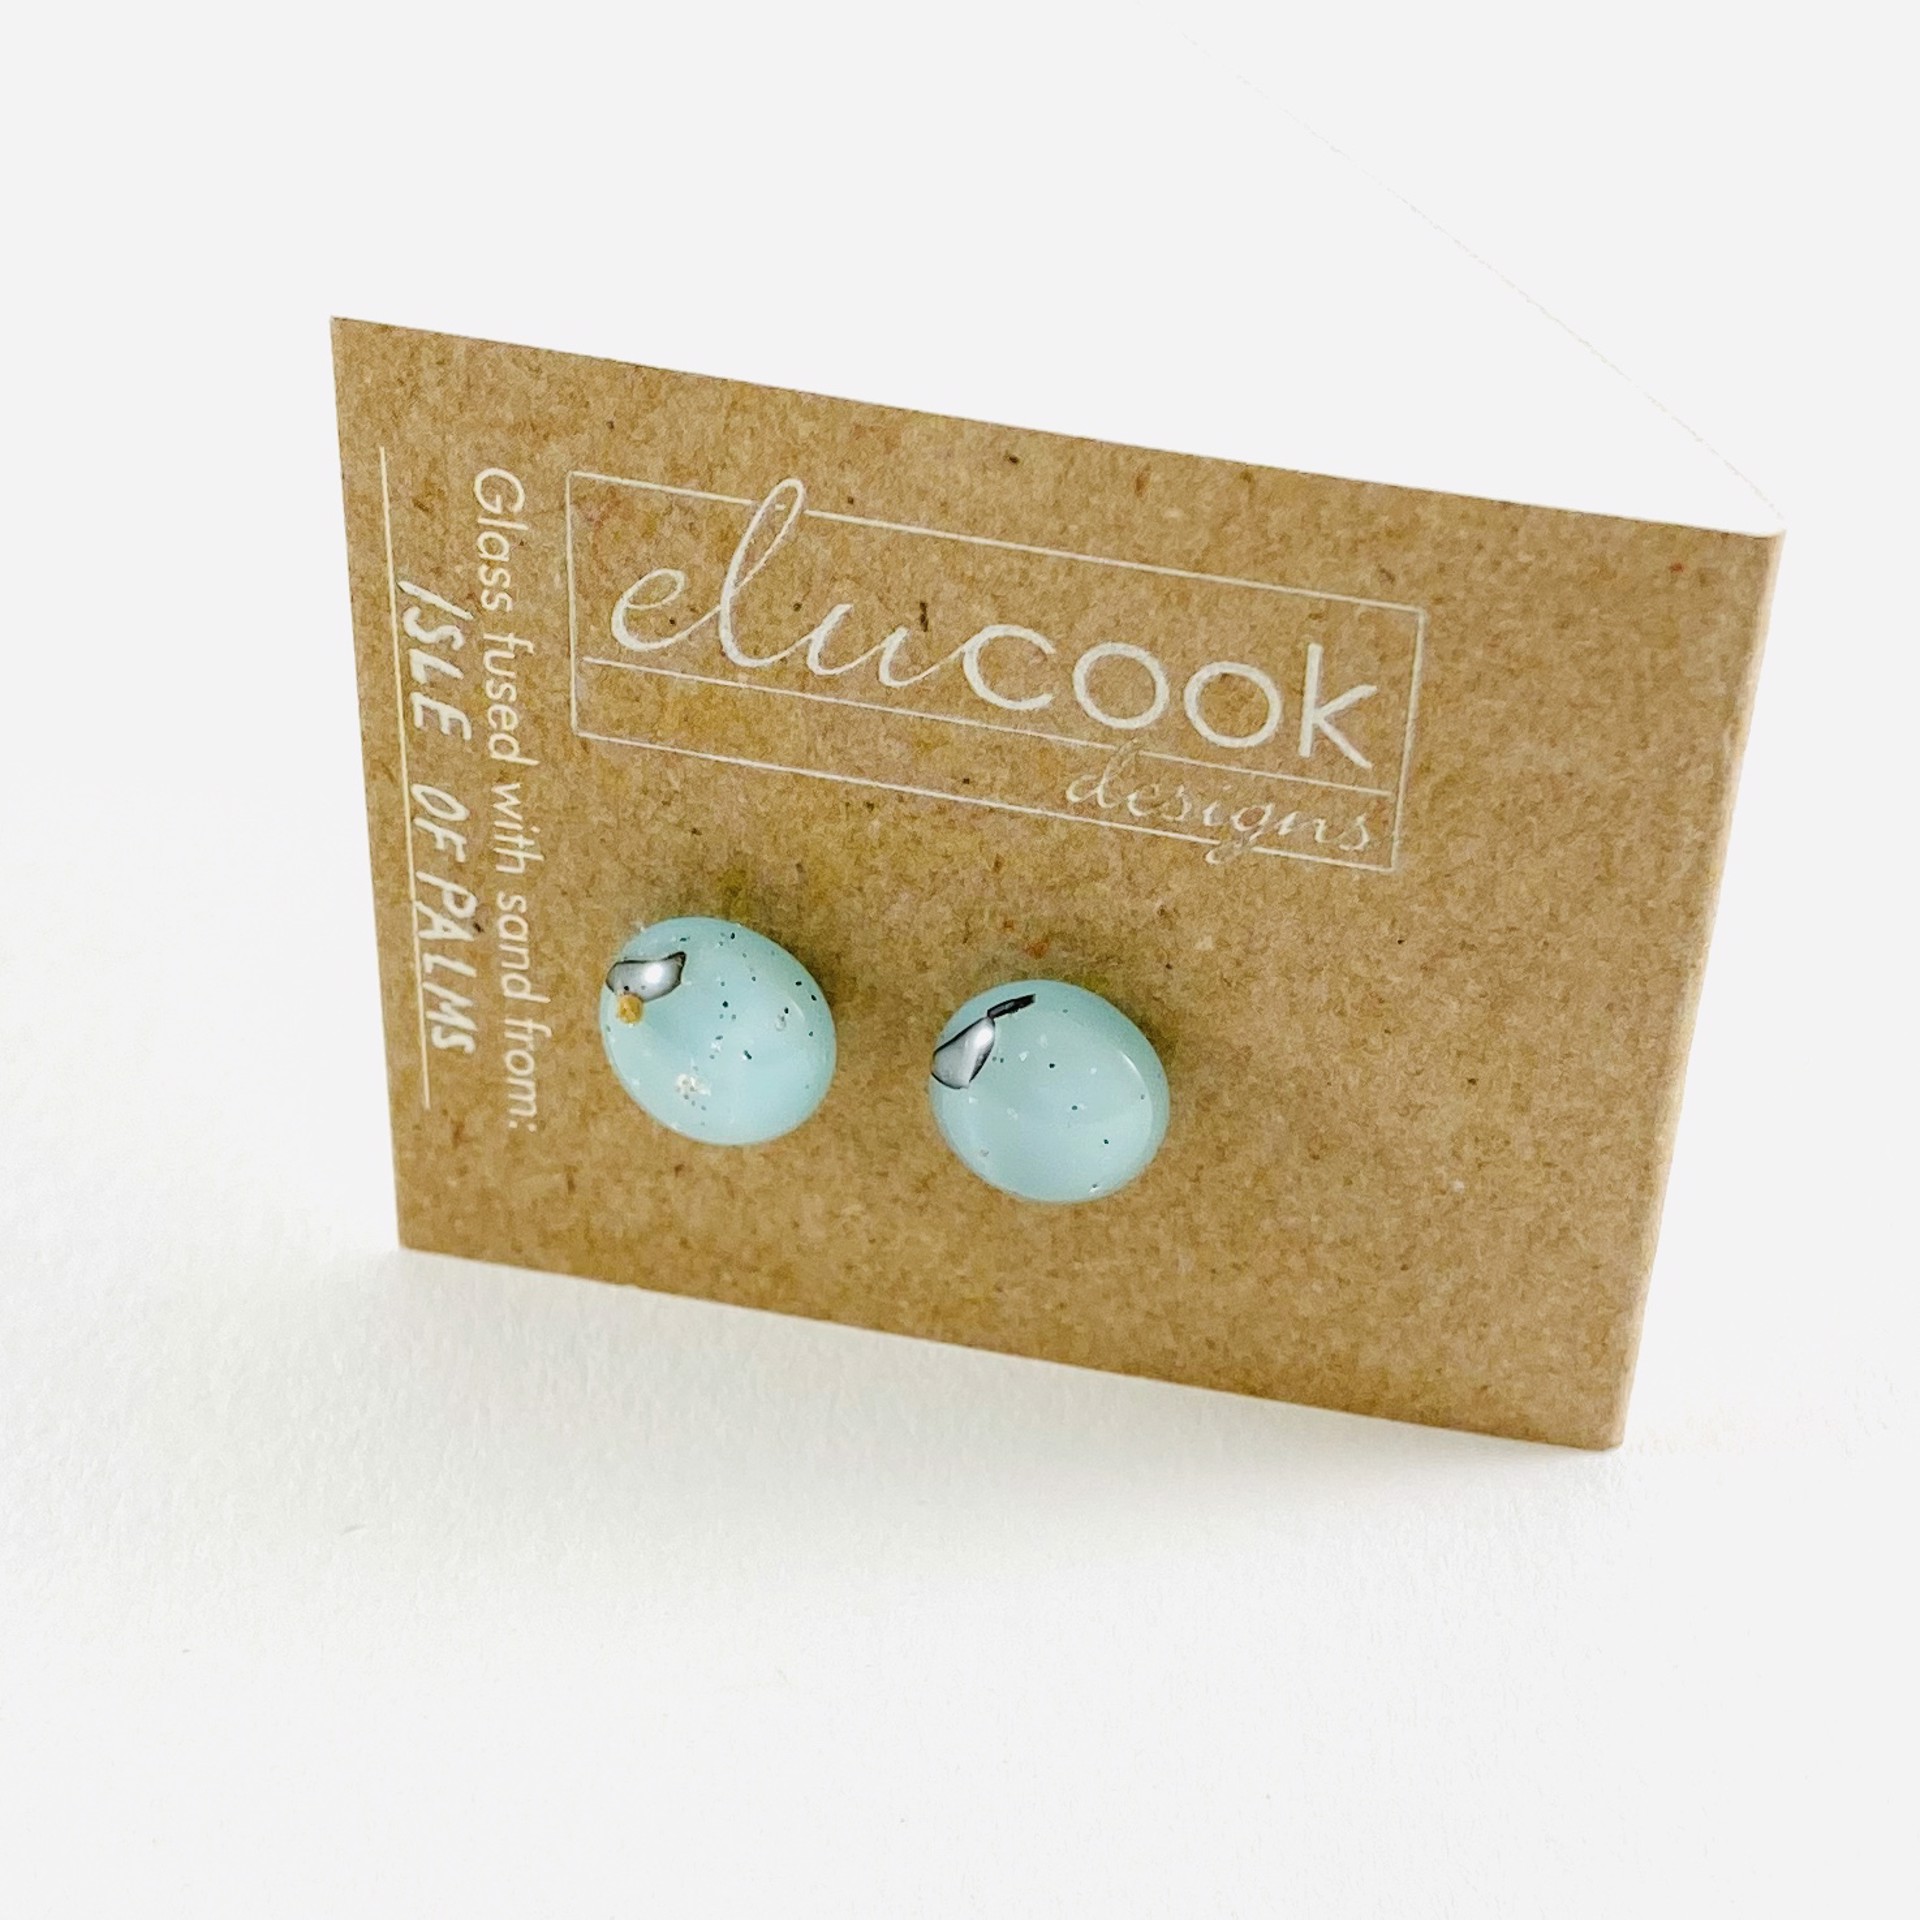 Button earrings, 8r by Emily Cook